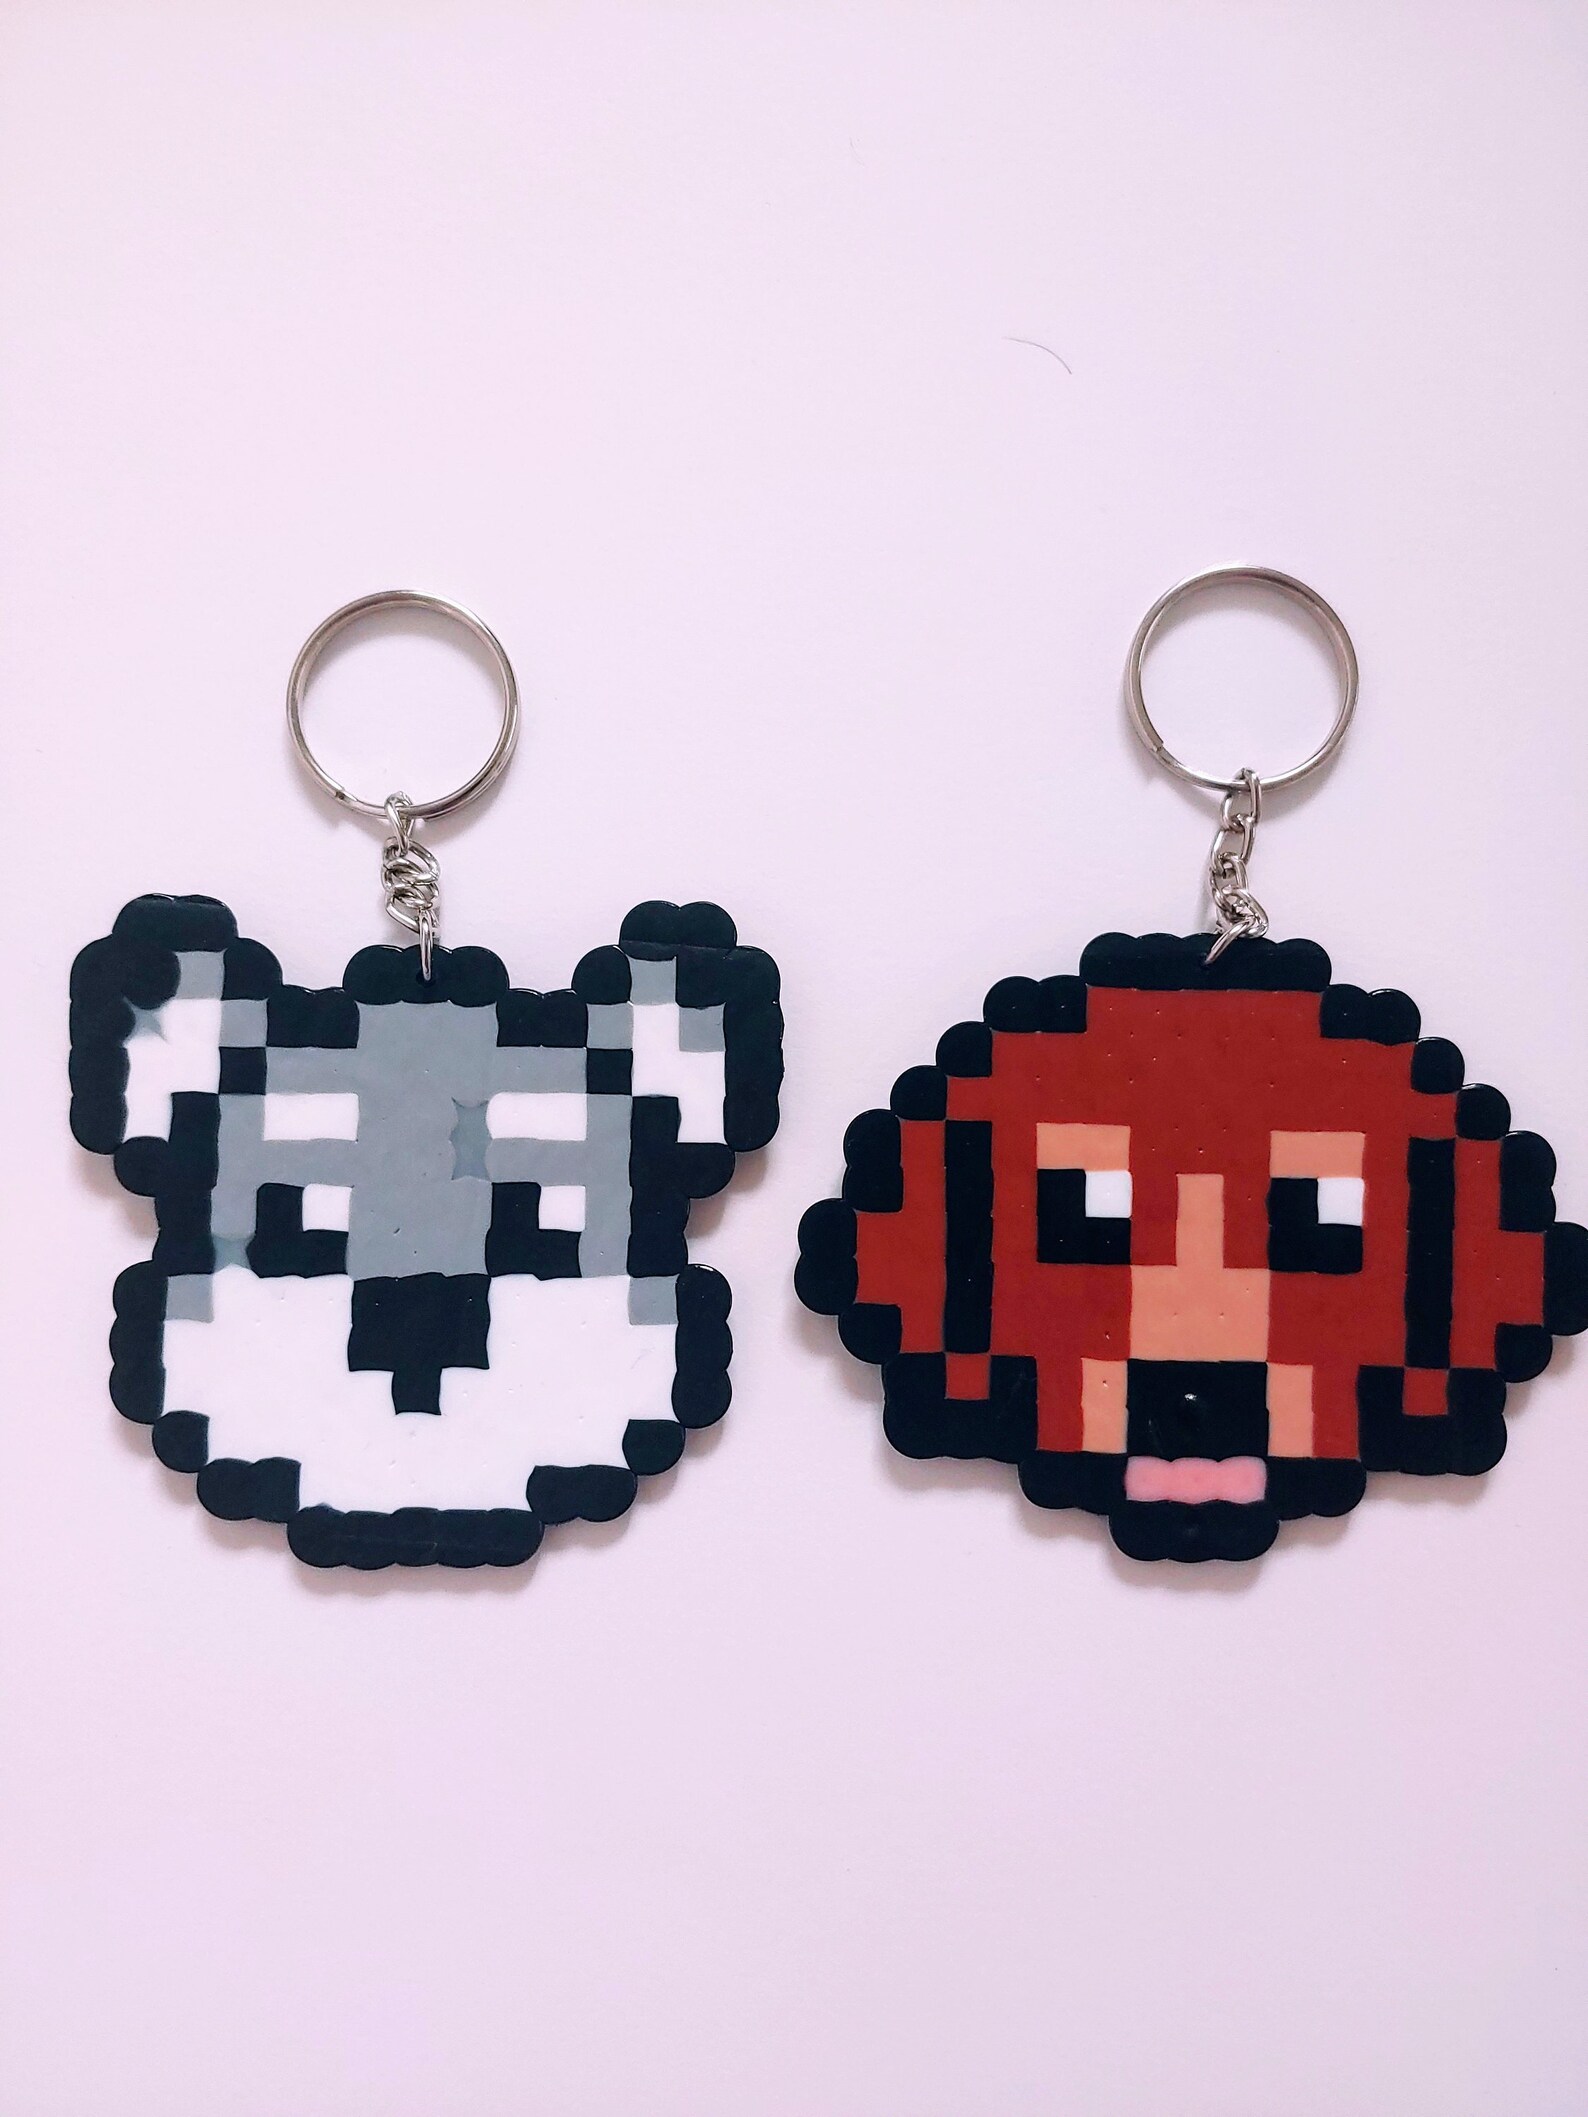 Handmade Puppy Keychains Perler Beads Pixel Design Cute and - Etsy